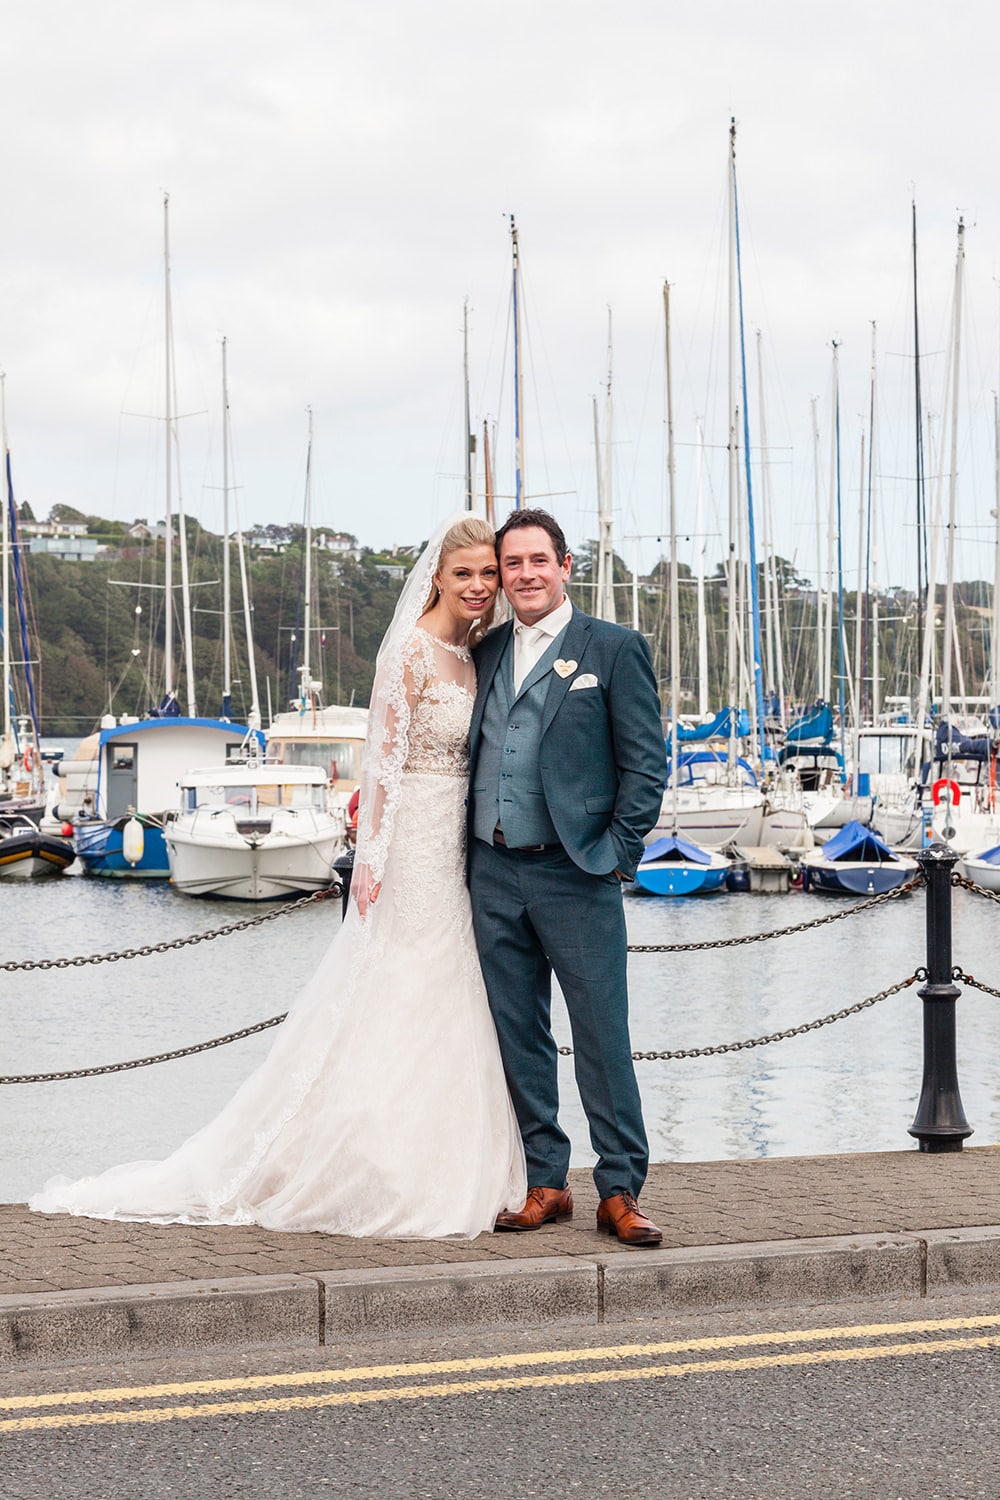 Bride and groom posing by sailboat in kinsale marina